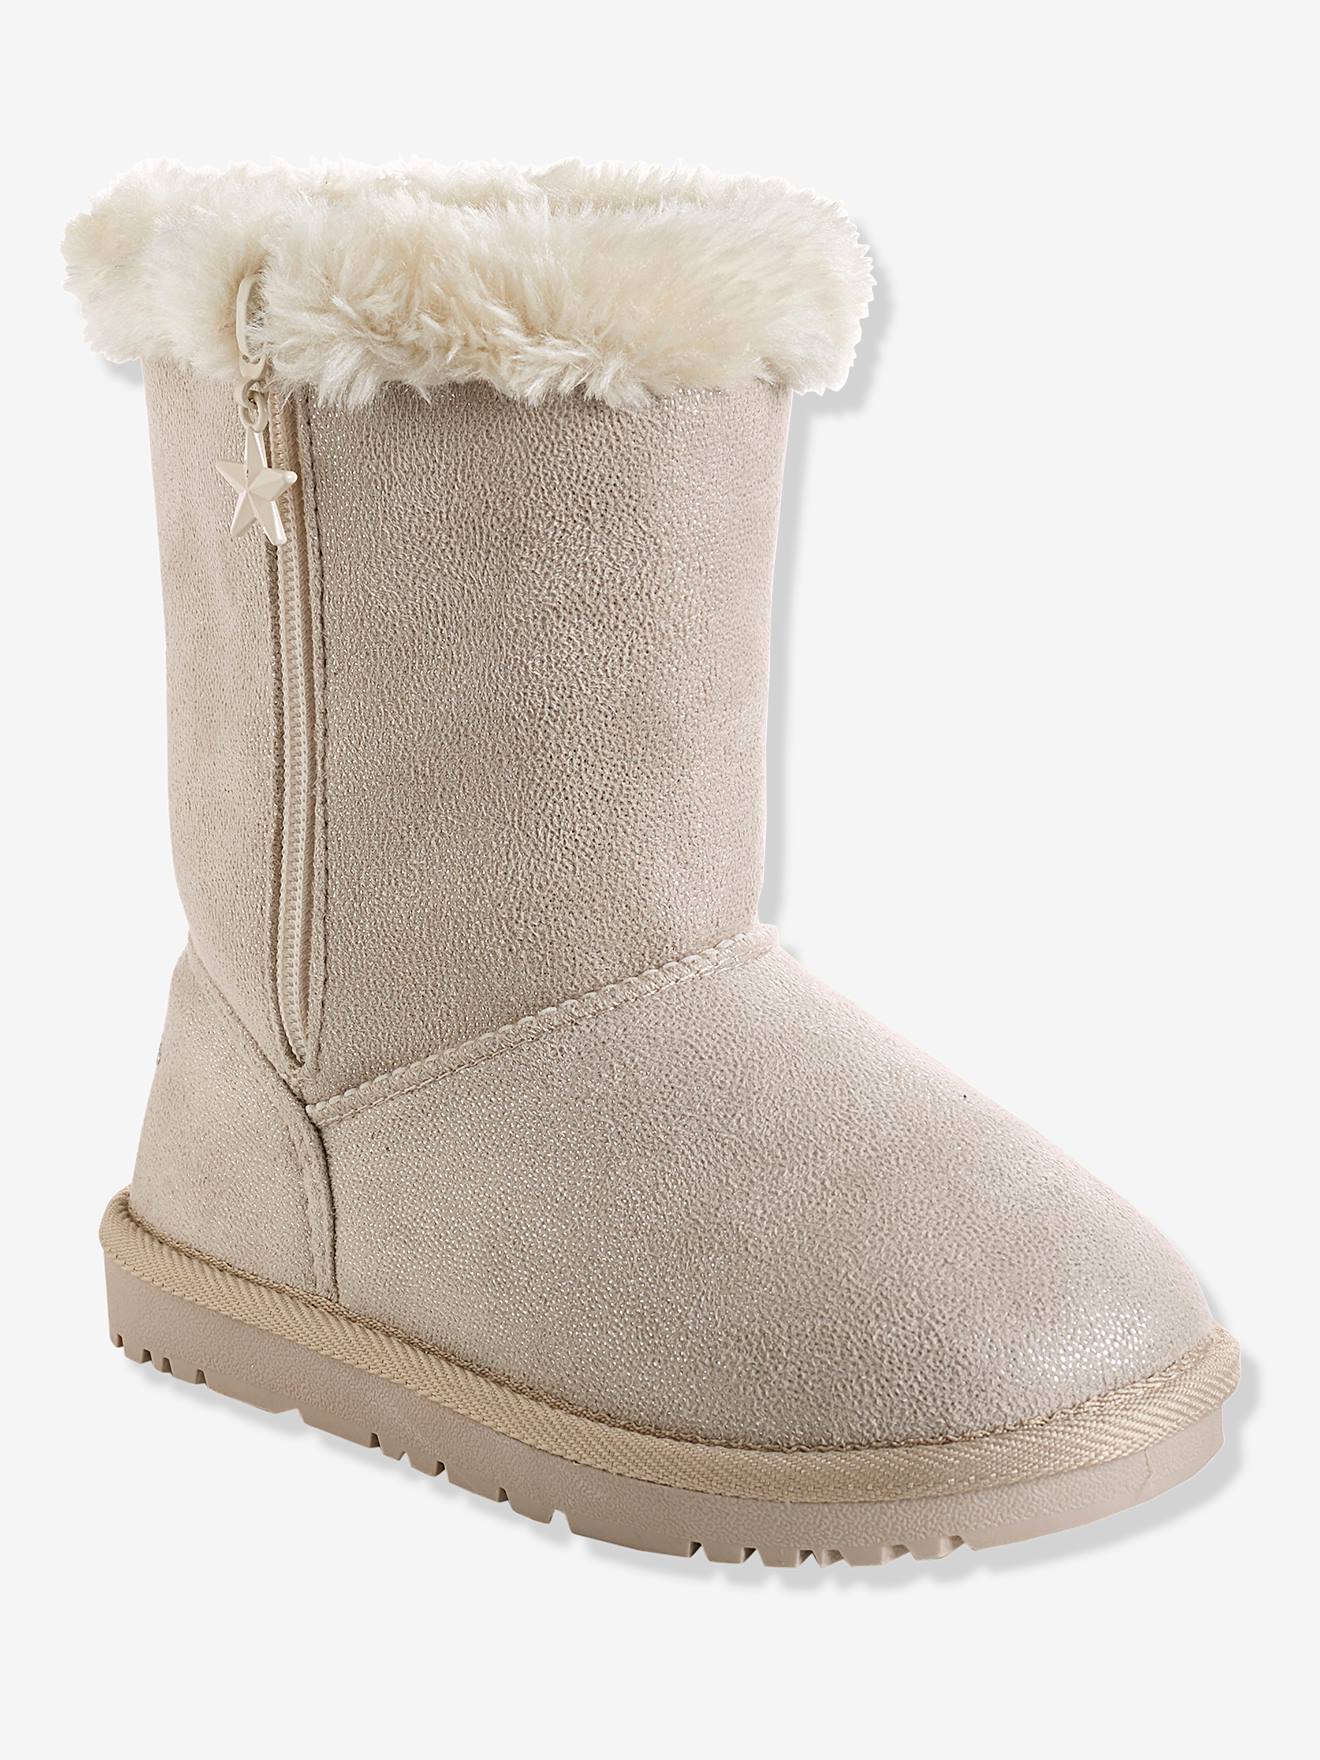 Girls' Boots with Fur - beige light 